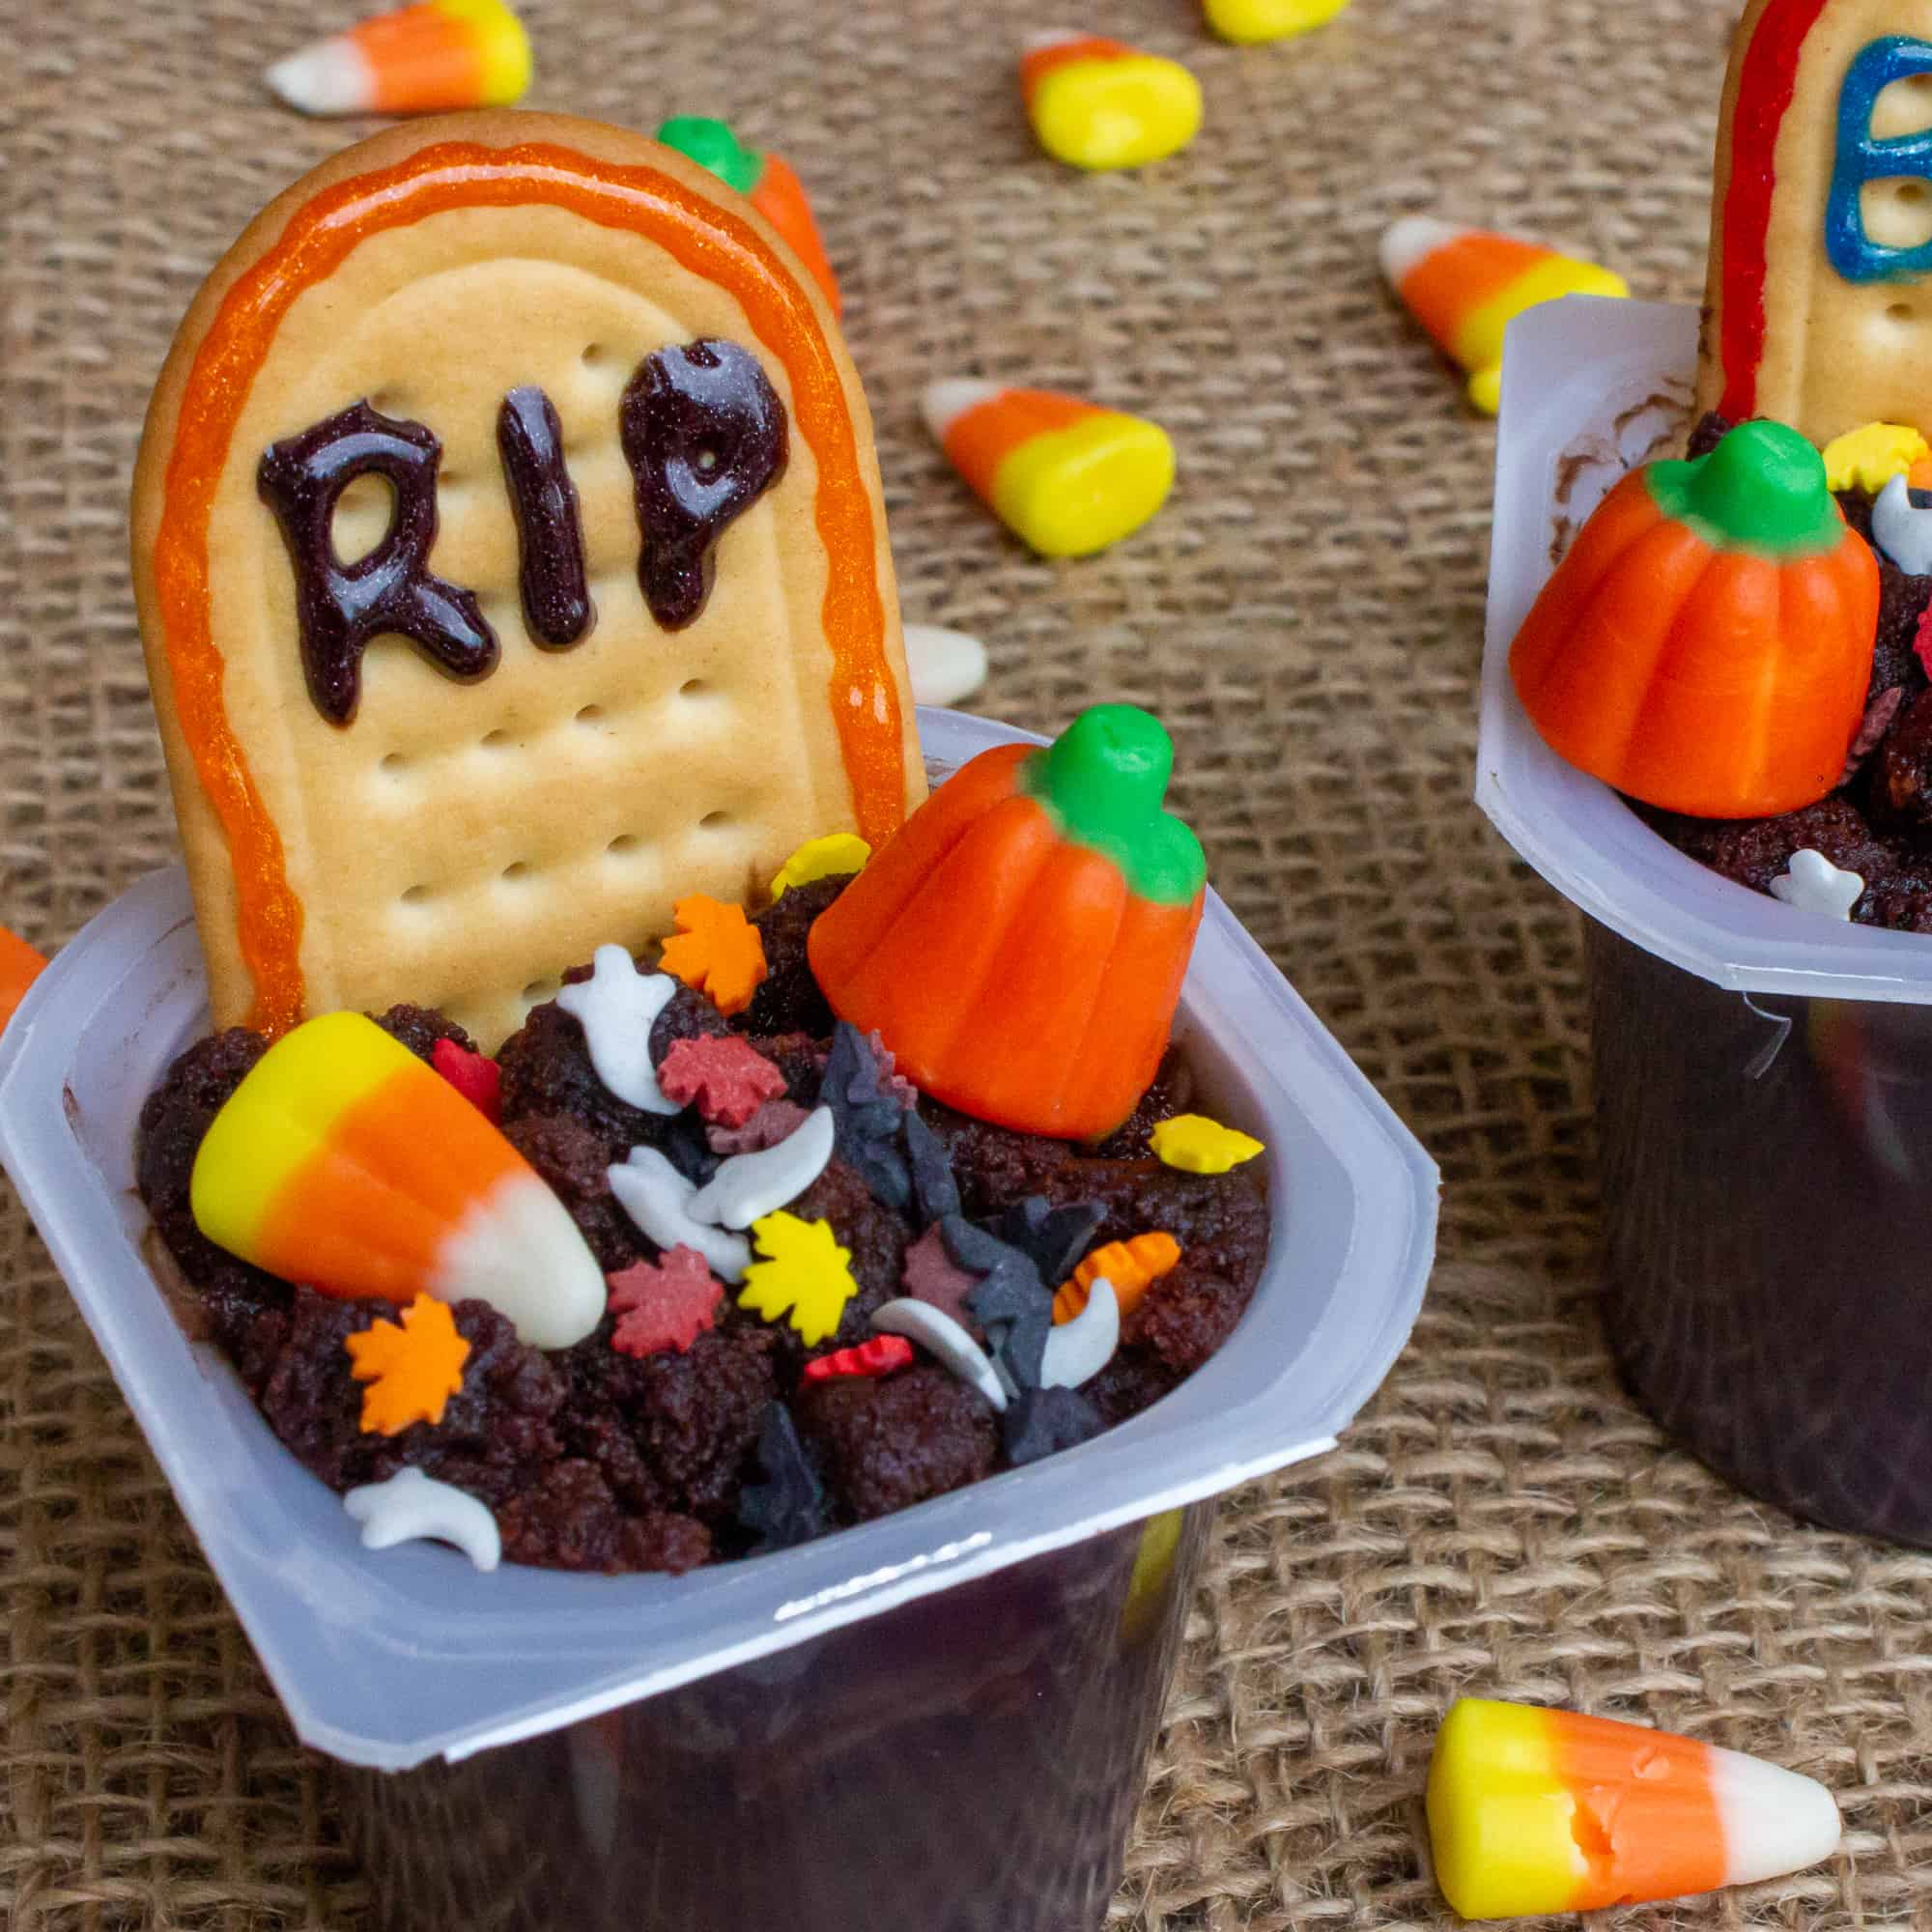 These Halloween pudding cup graveyard treats are the perfect single serving dessert for Halloween. This recipe is very easy to make with Jello Pudding cups.